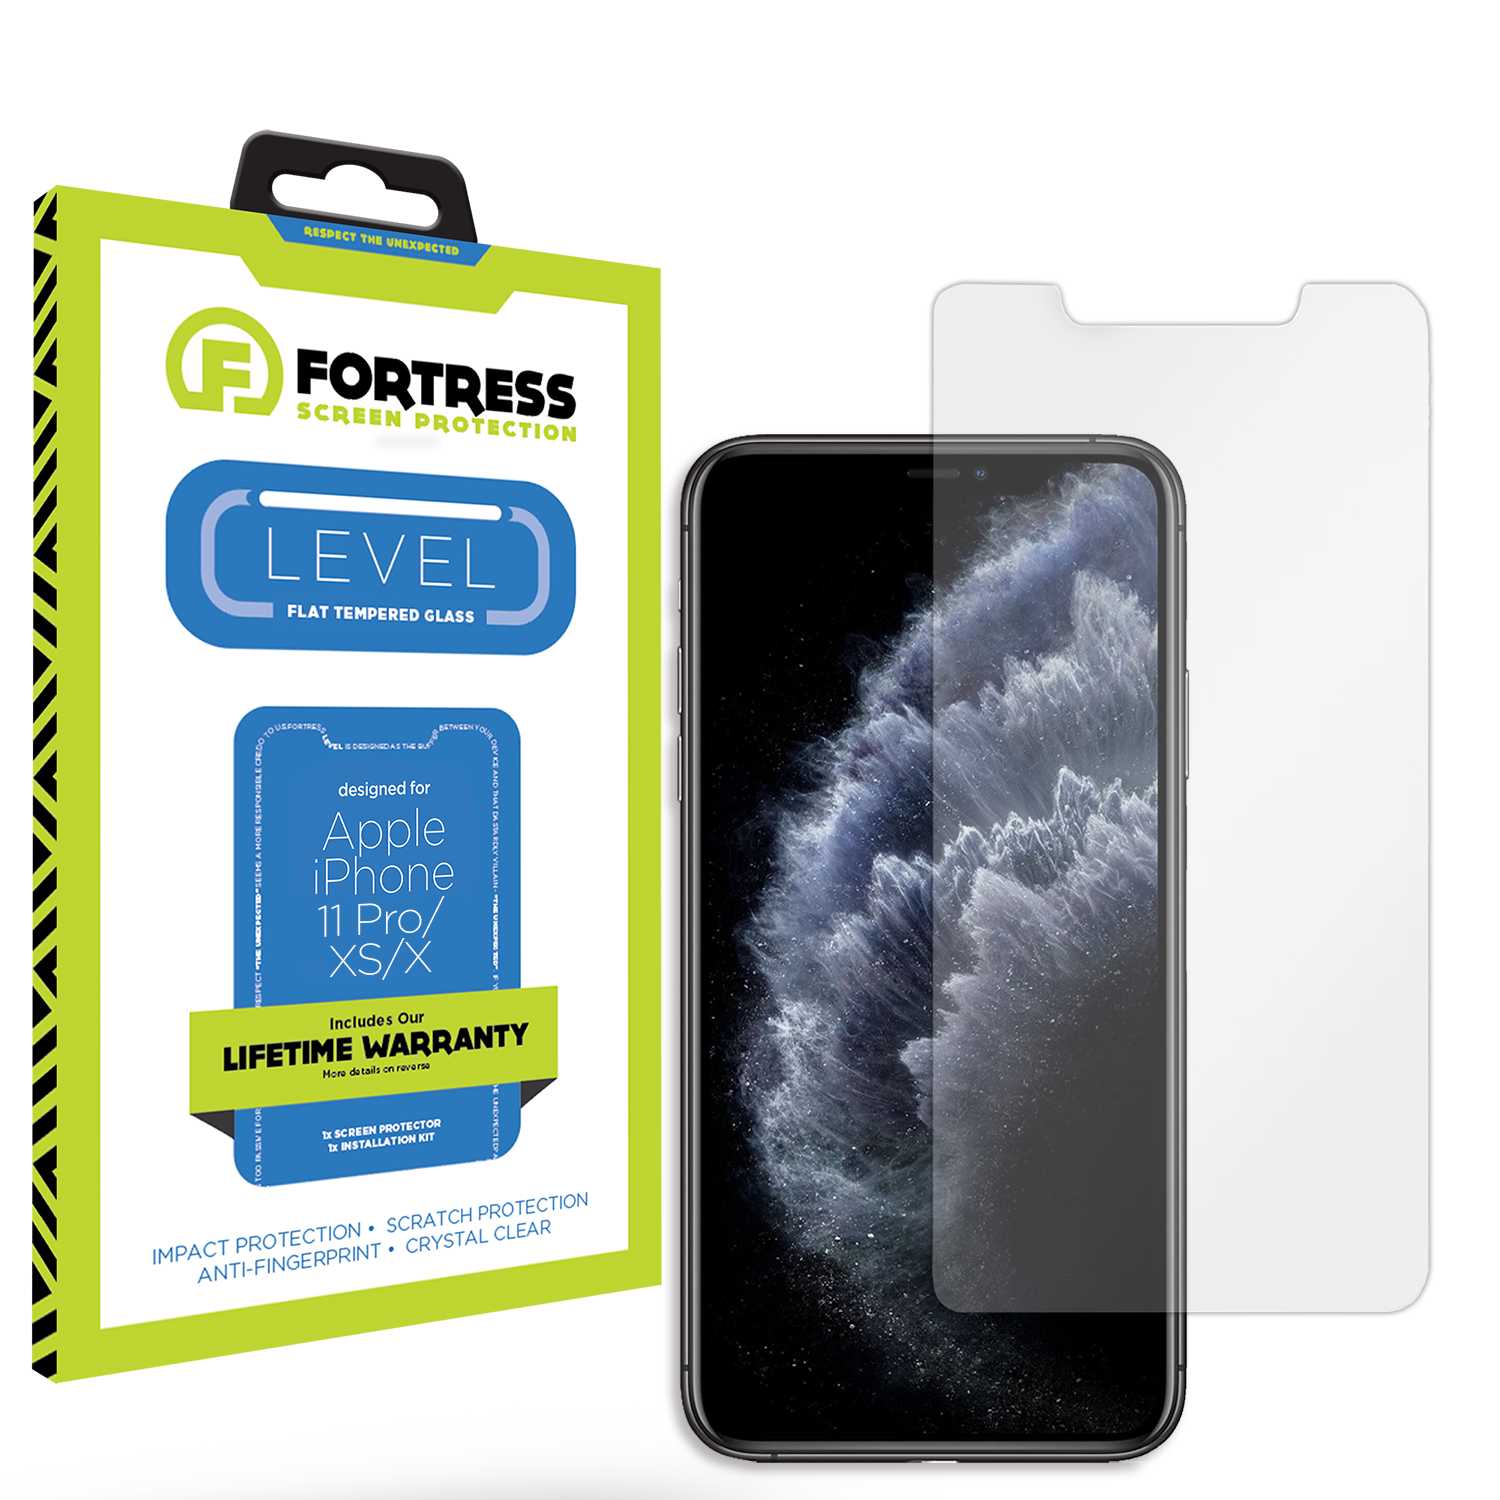 Fortress iPhone 11 Pro Screen Protector $0Coverage Scooch Screen Protector